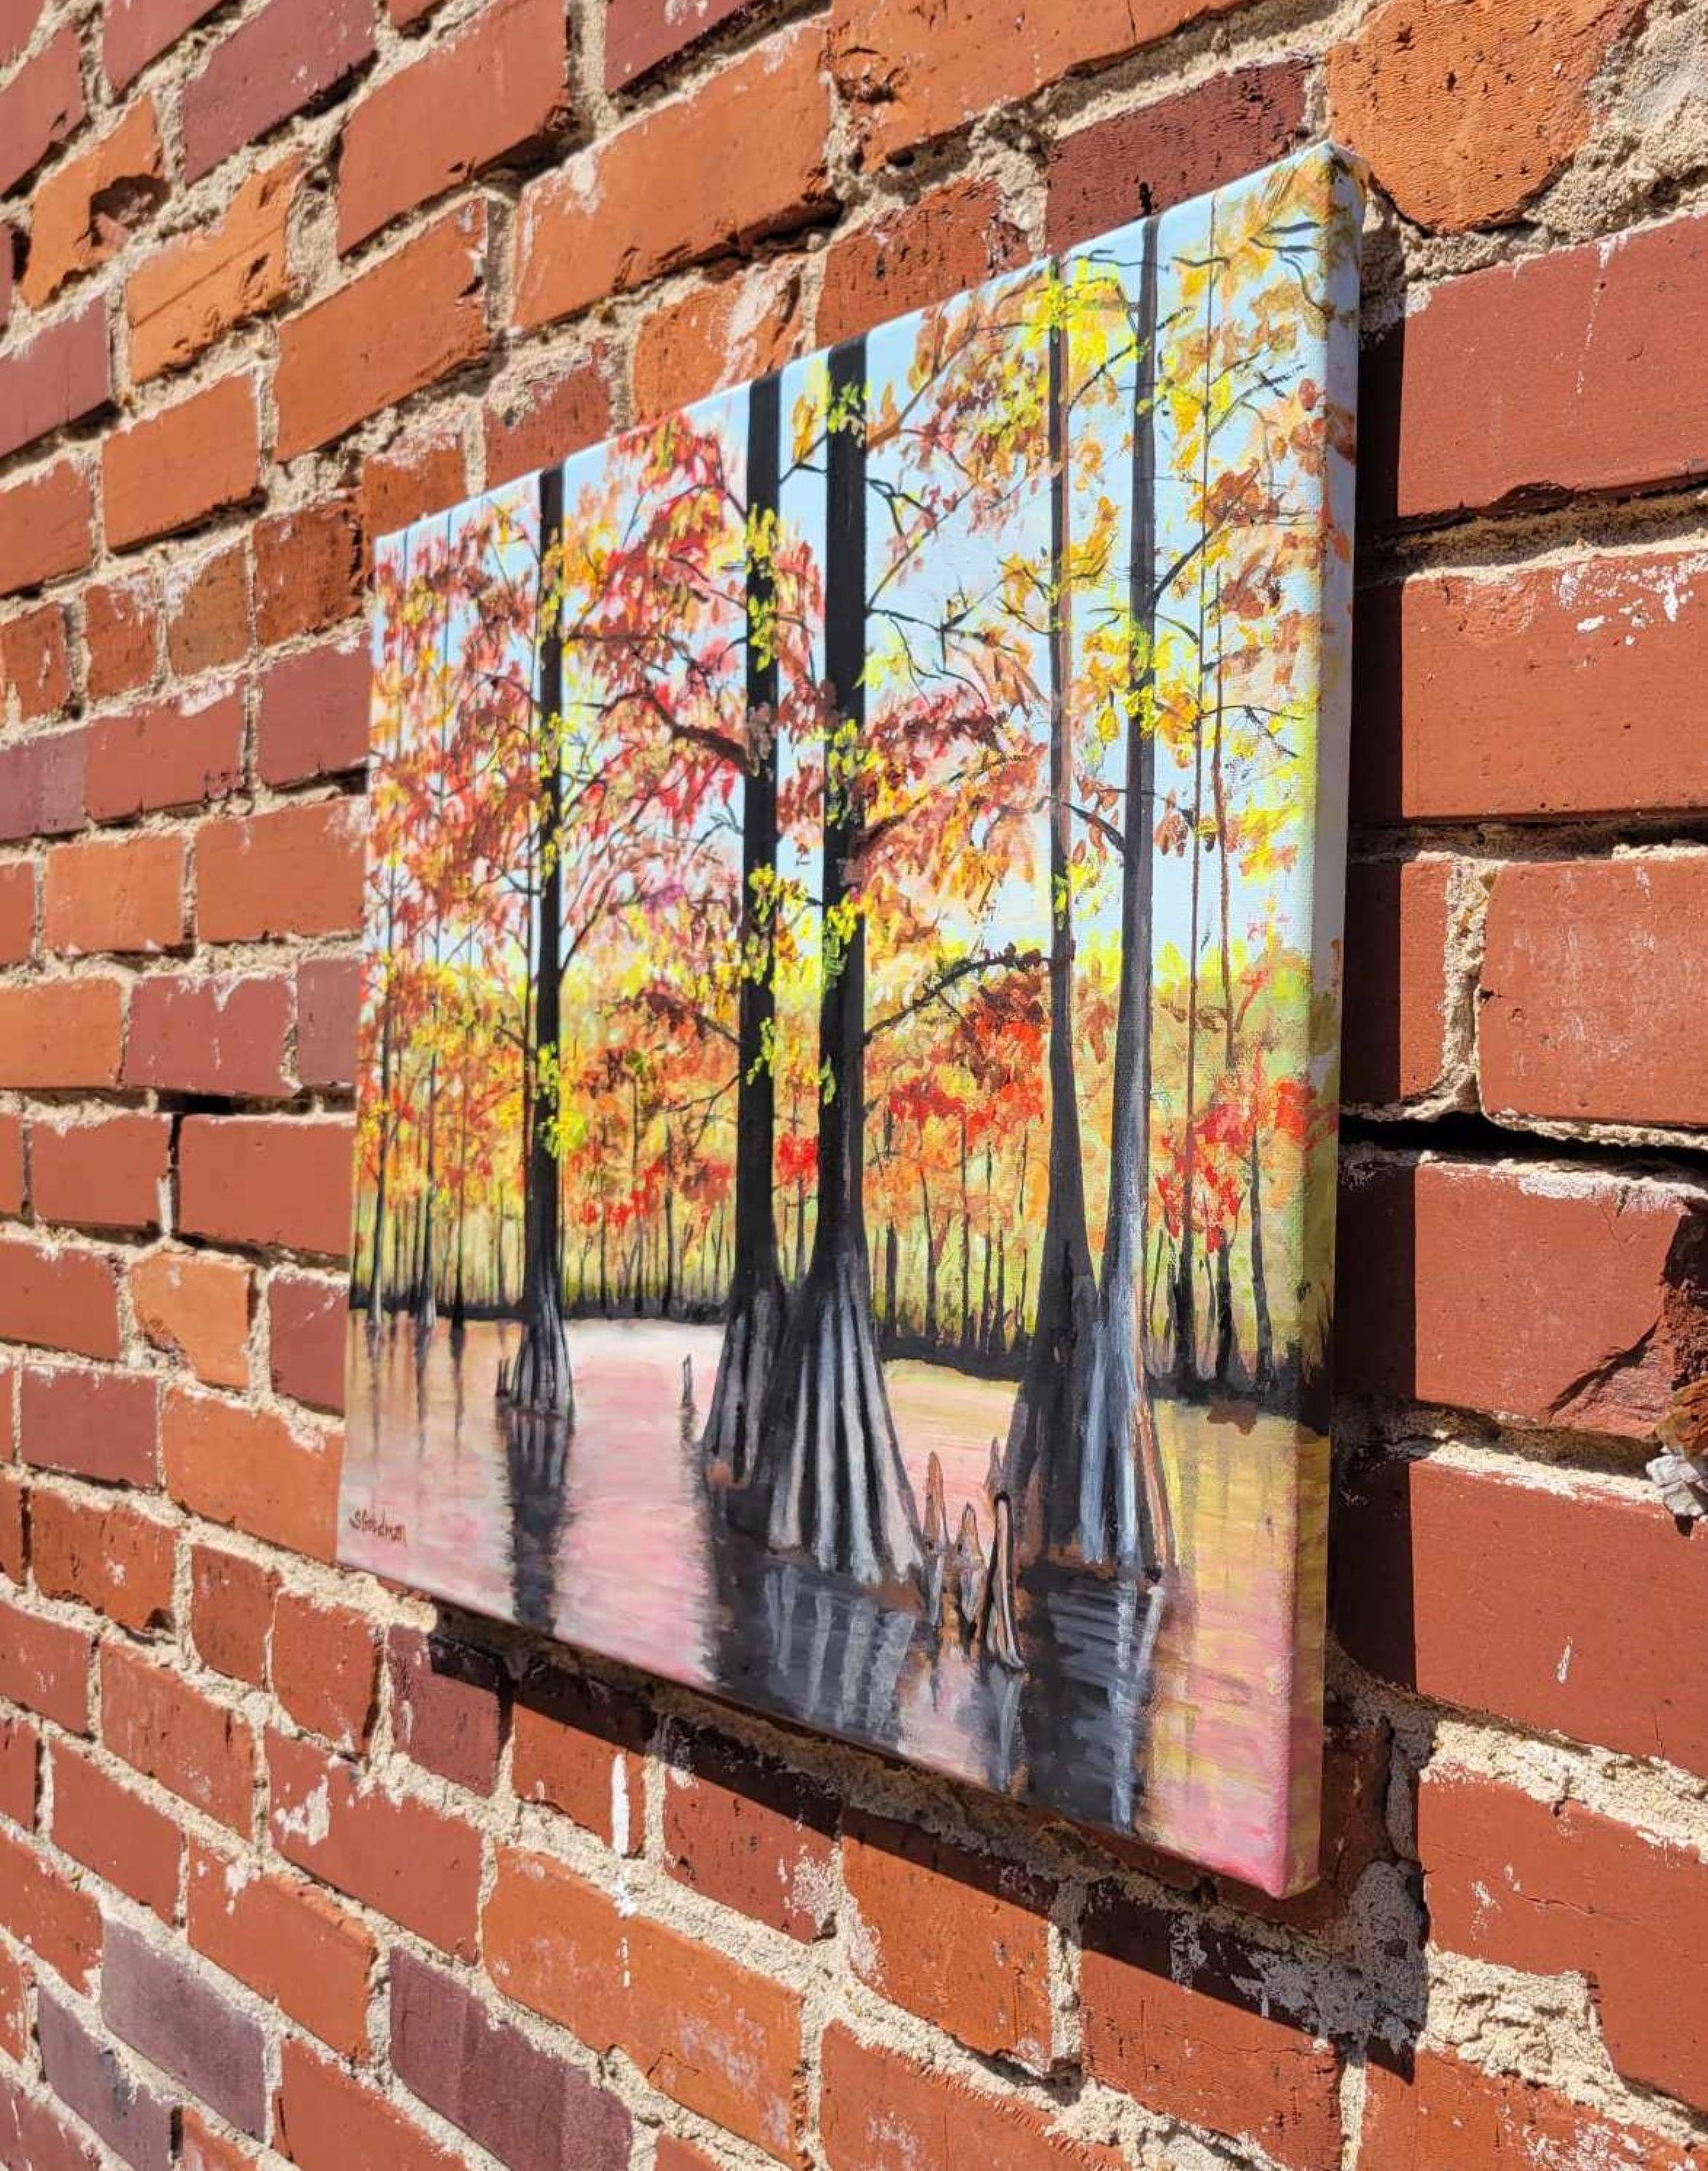 <p>Artist Comments<br>The painting depicts a serene autumn scene in the delta land of the Mississippi River. Towering cypress trees encircle the area, with the water hazily reflecting their yellow and orange-tinted leaves. The composition exudes a